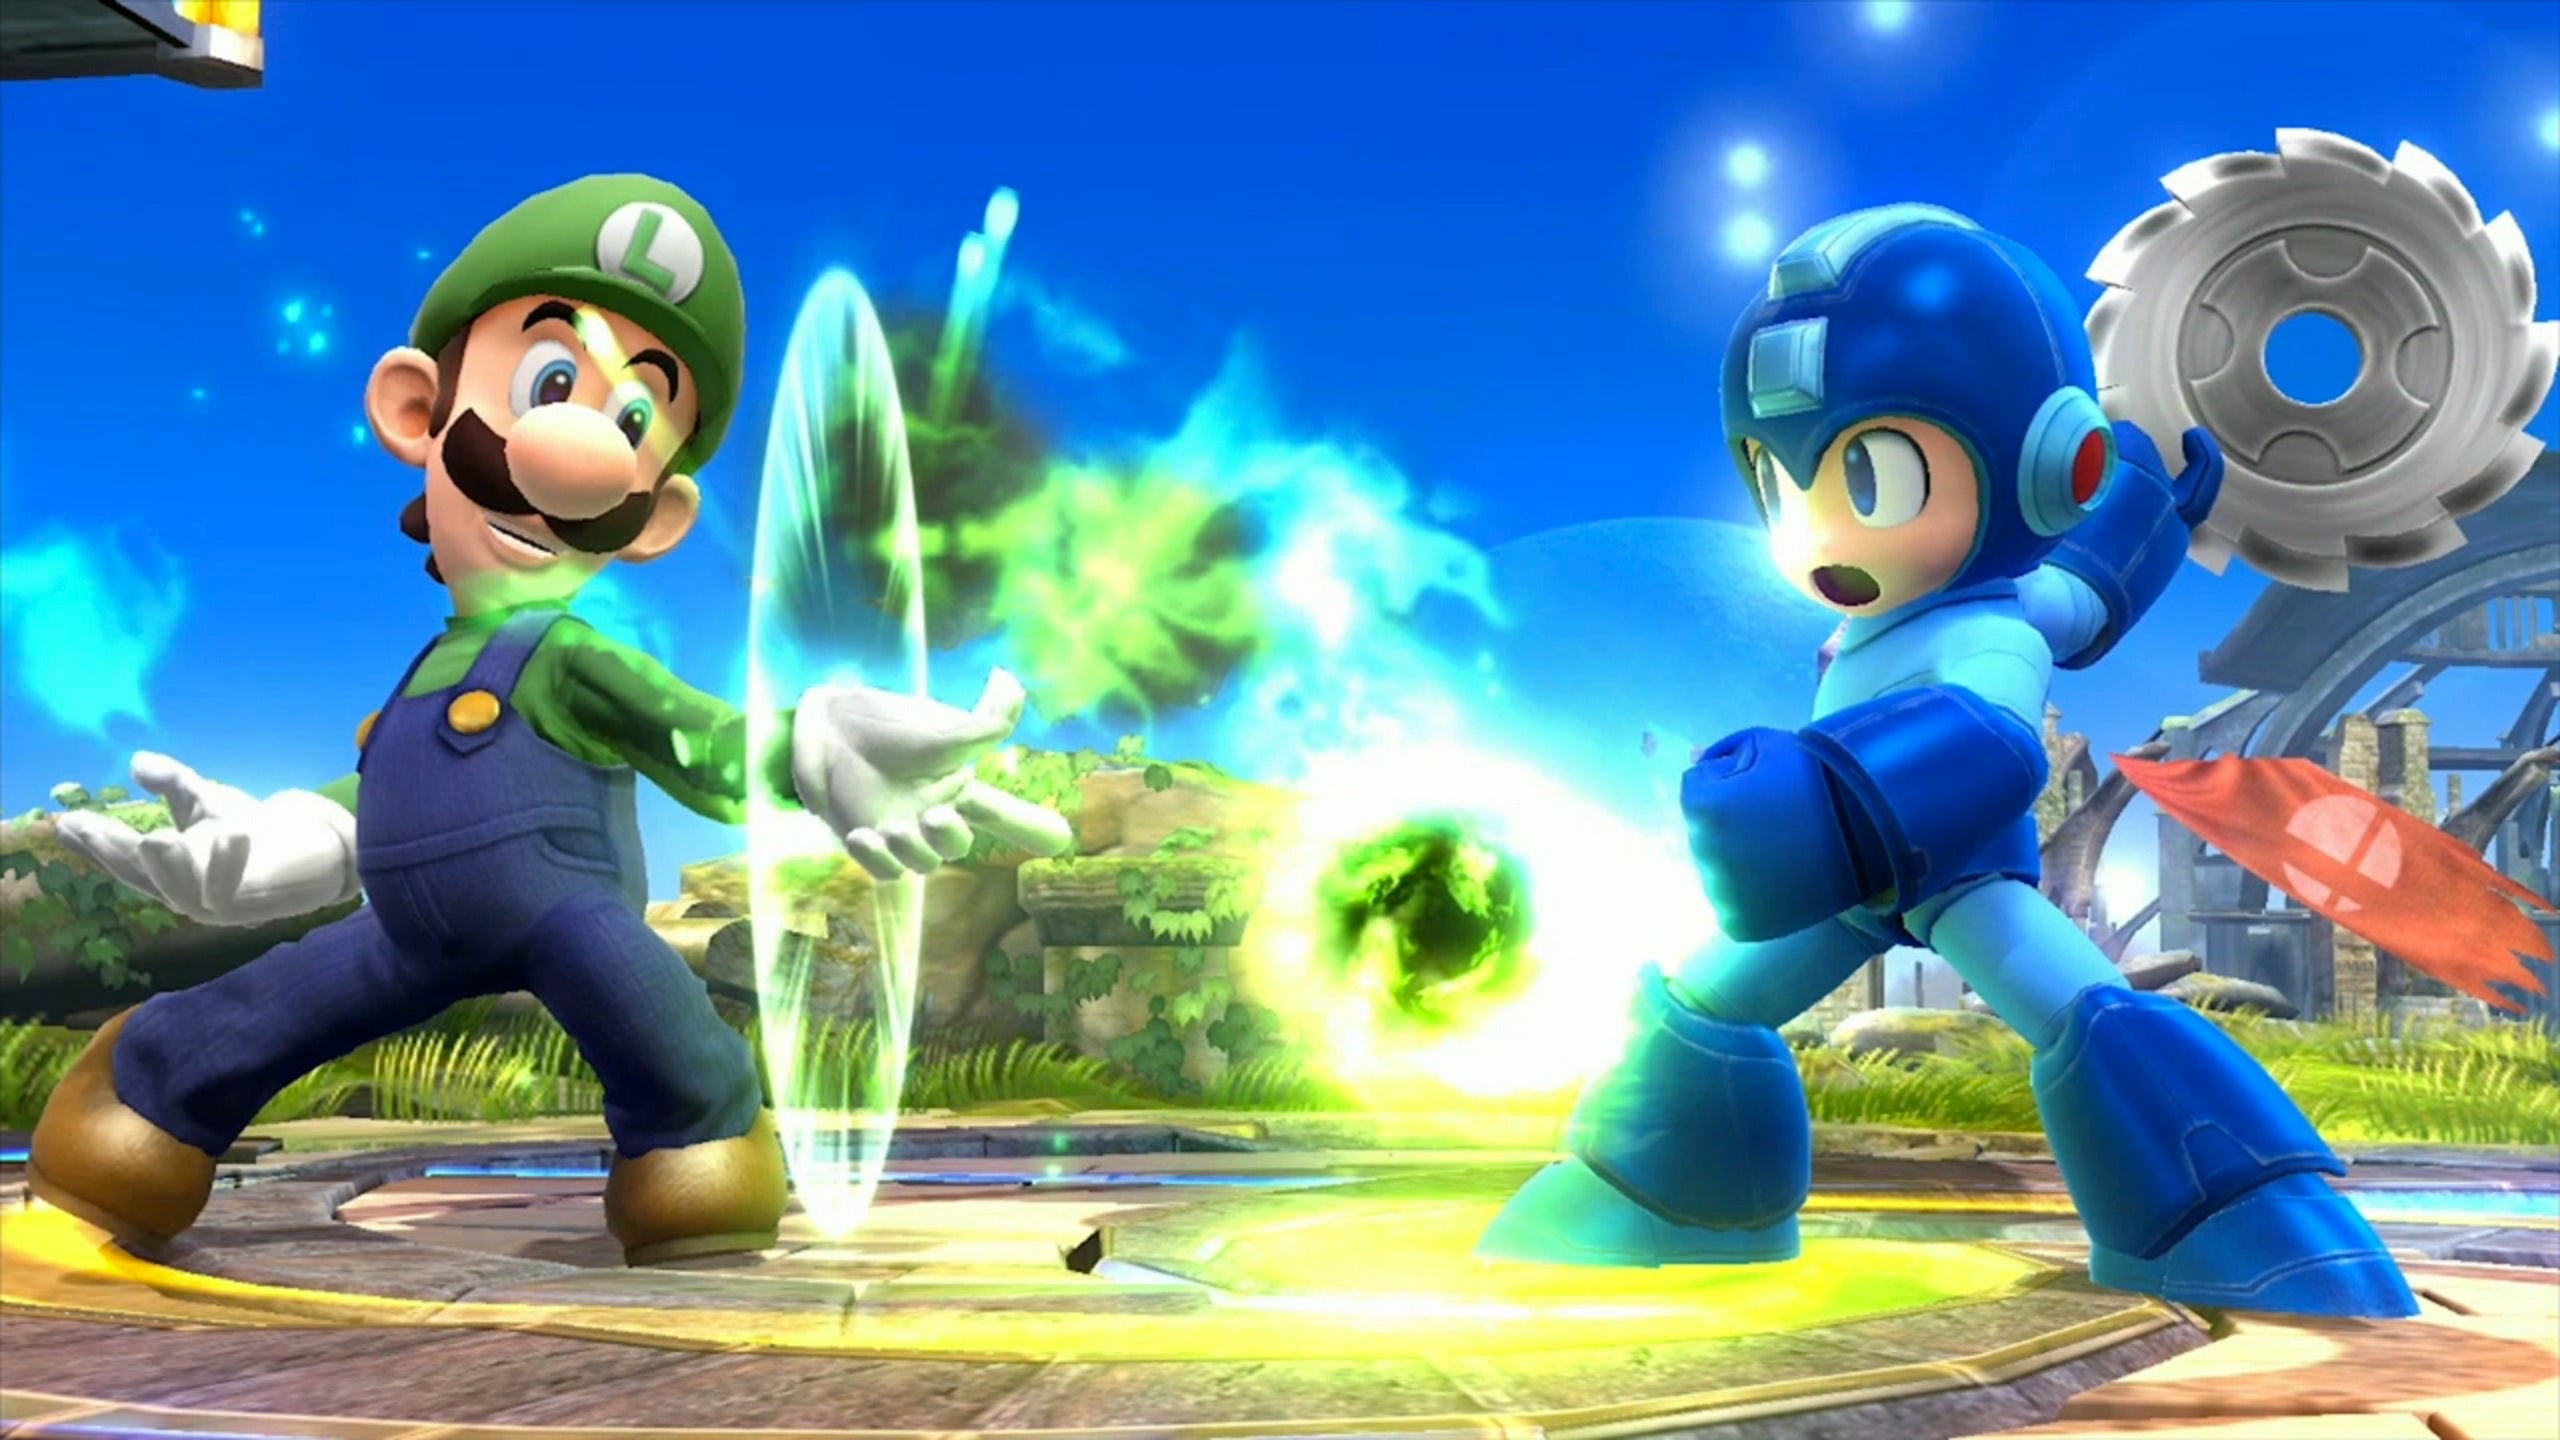 Image for Surprise: Super Smash Bros. Wii U is the fastest-selling video game in the US